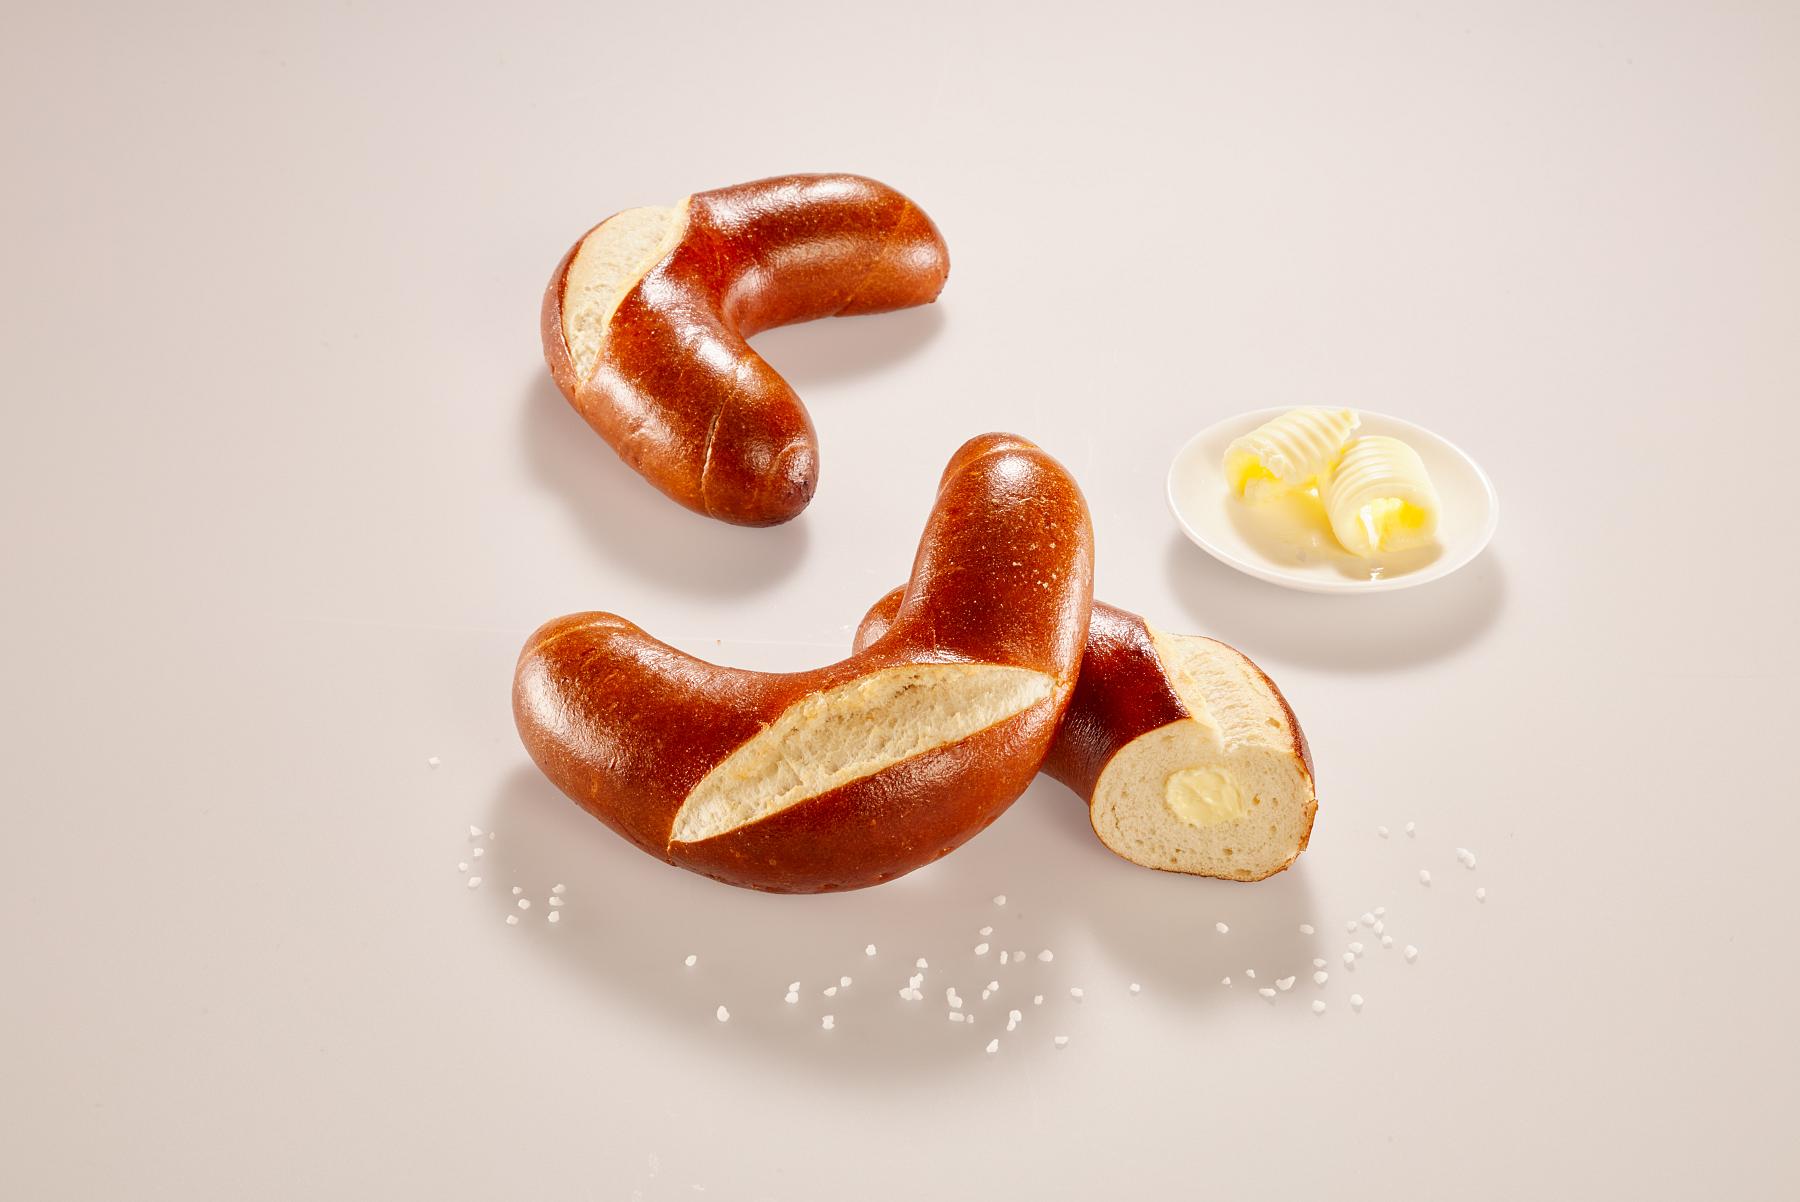 Pretzel boomerang filled with salted butter, 84 g